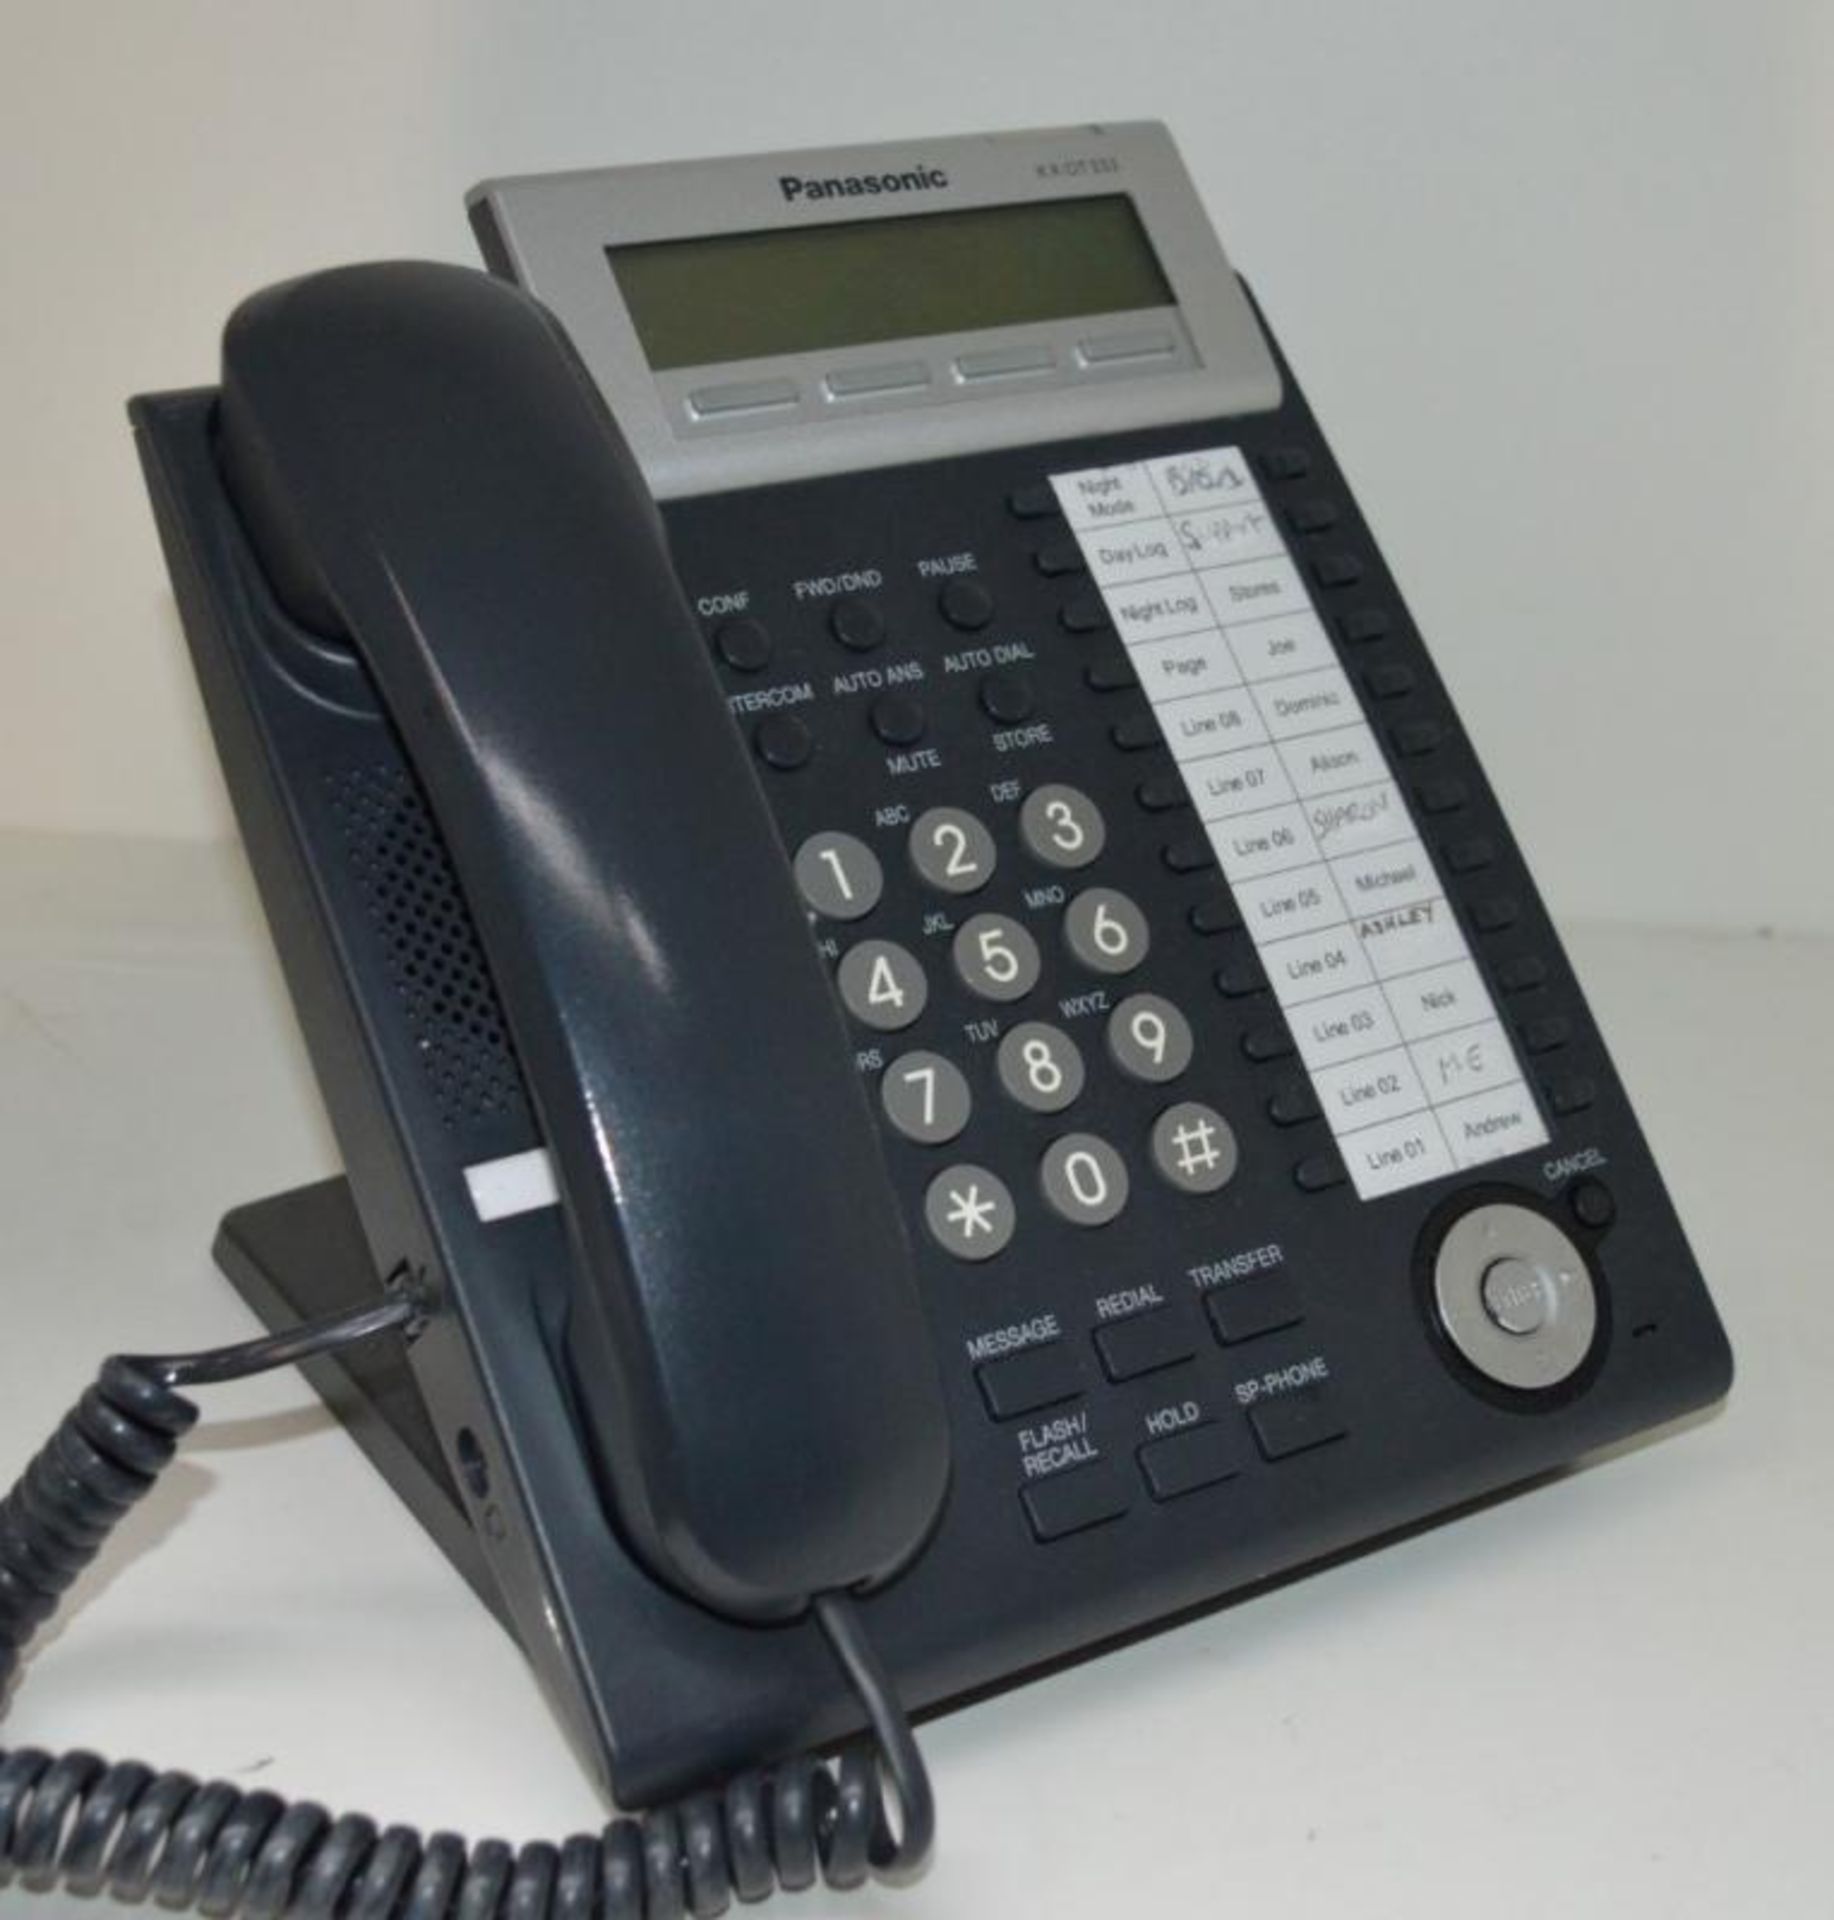 4 x Panasonic KX-DT333 Telephone Handsets - Removed From Office Environment - CL011 - Ref B1 - Locat